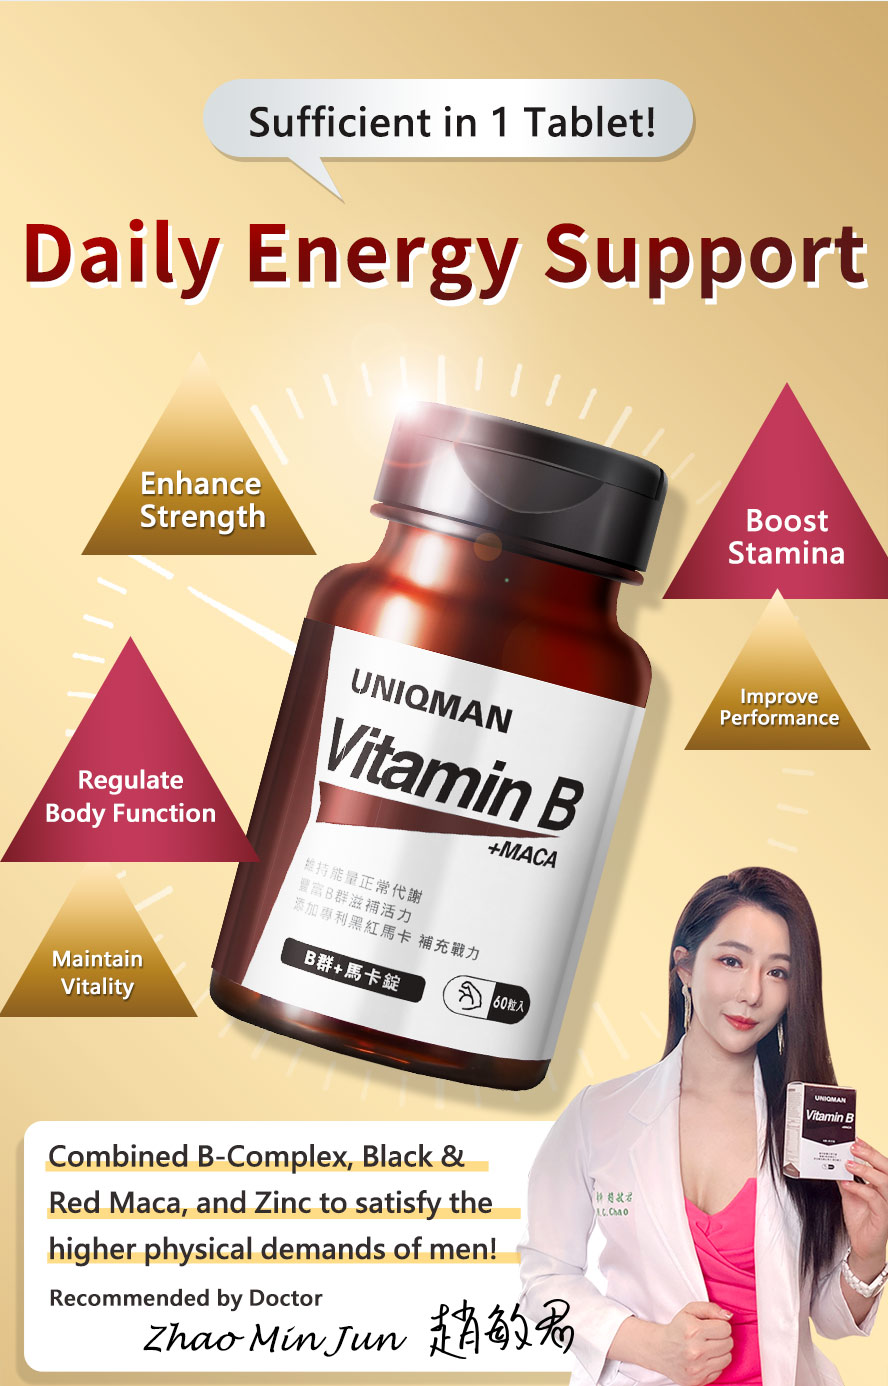 UNIQMAN B Complex + Maca is recommended by doctor to enhance strength, boost stamina, improve performance, and maintain vitality